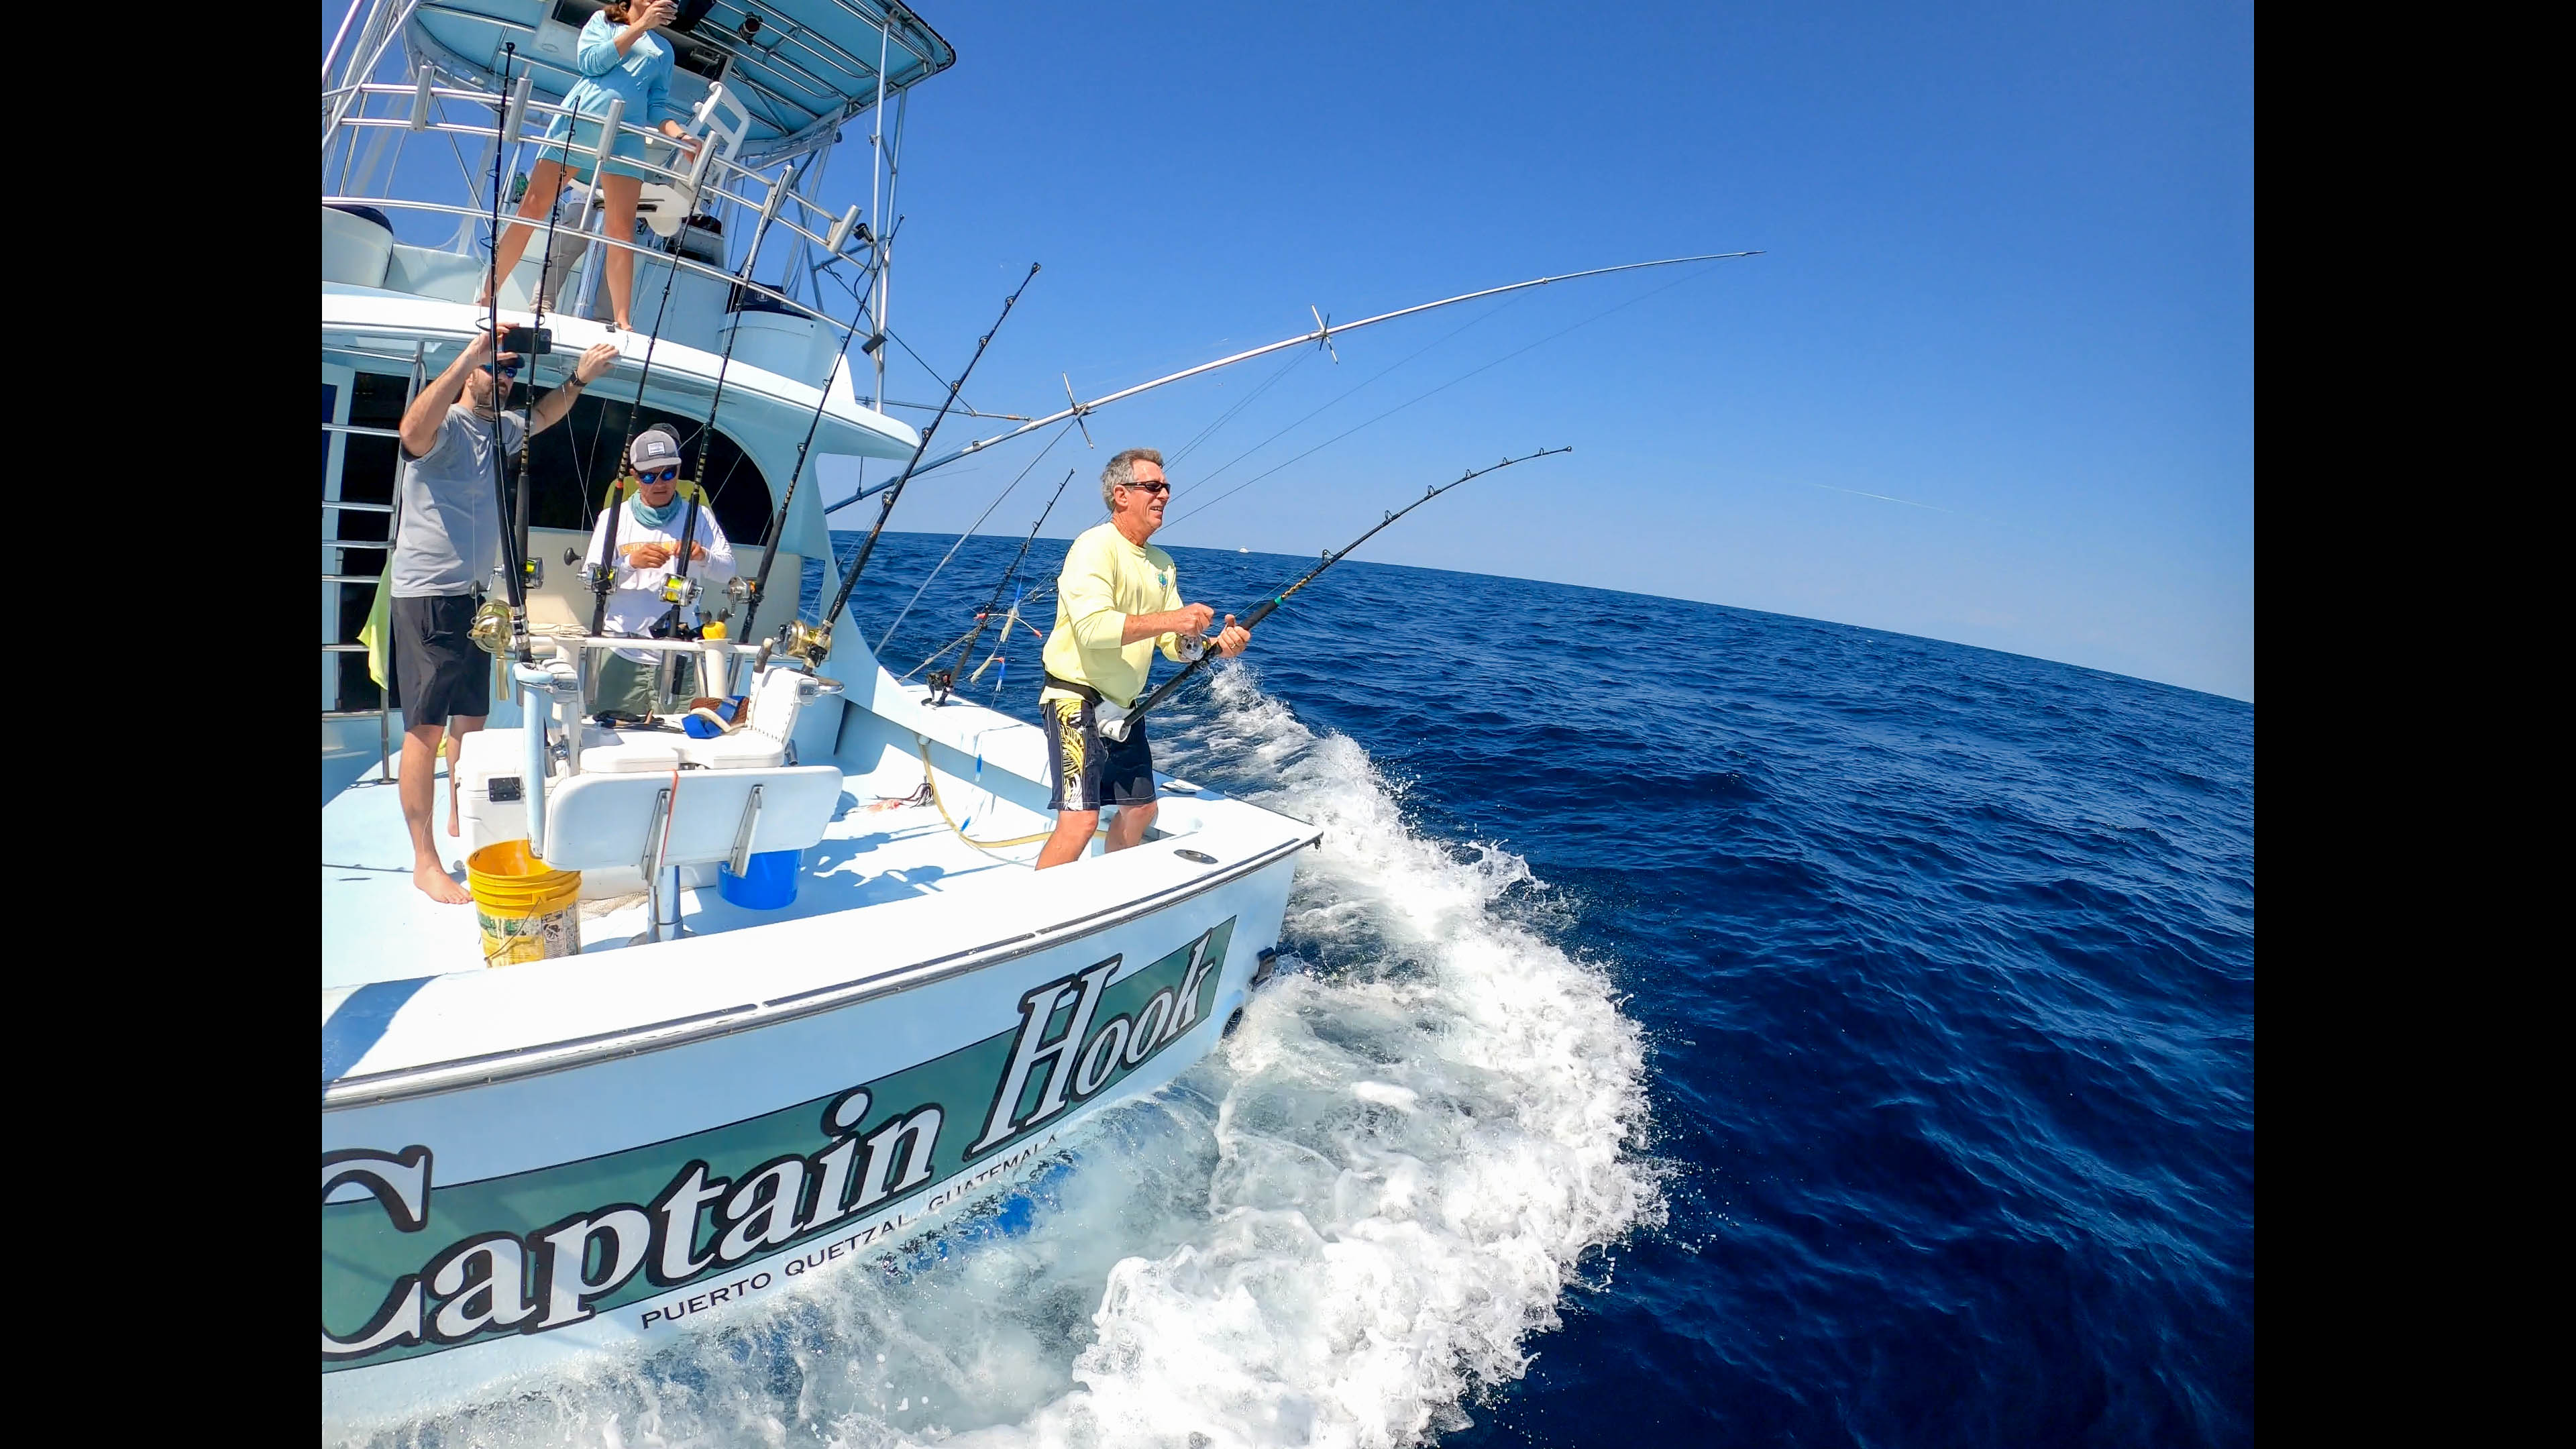 One full day fishing aboard 'Captain Hook' with IG